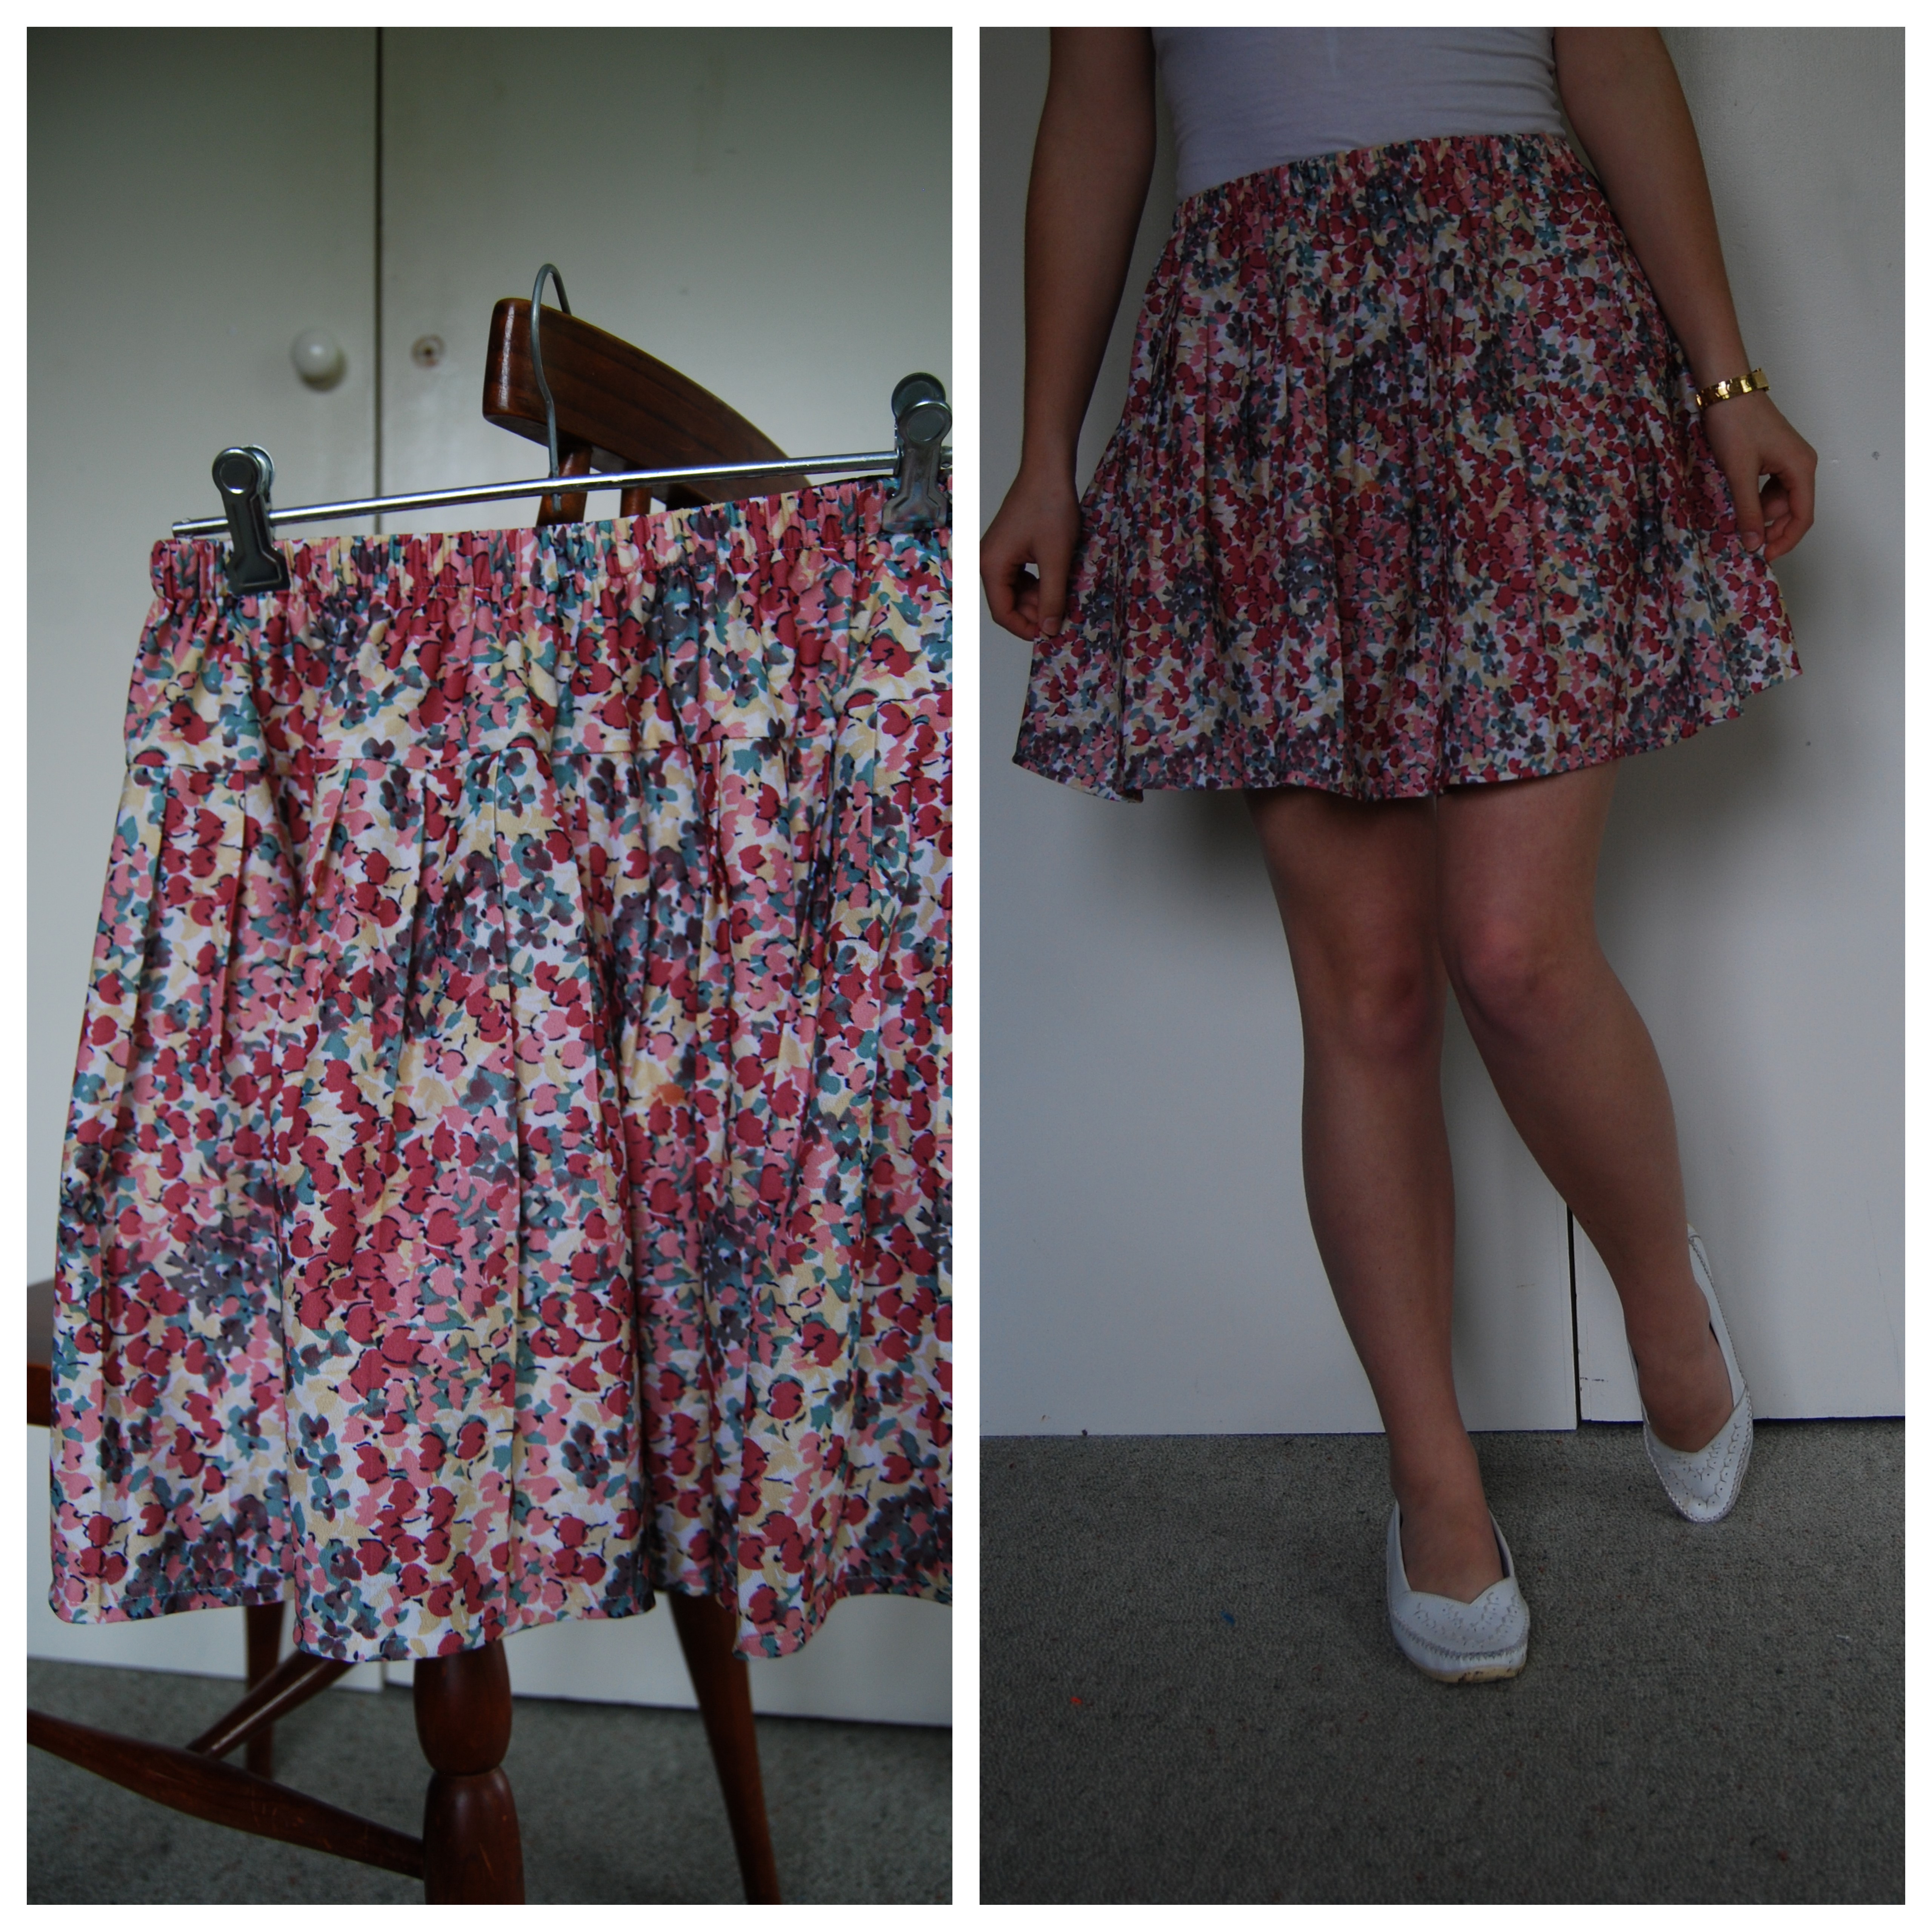 Upcycled & Handmade Summer Skirts – Sewing Projects | BurdaStyle.com